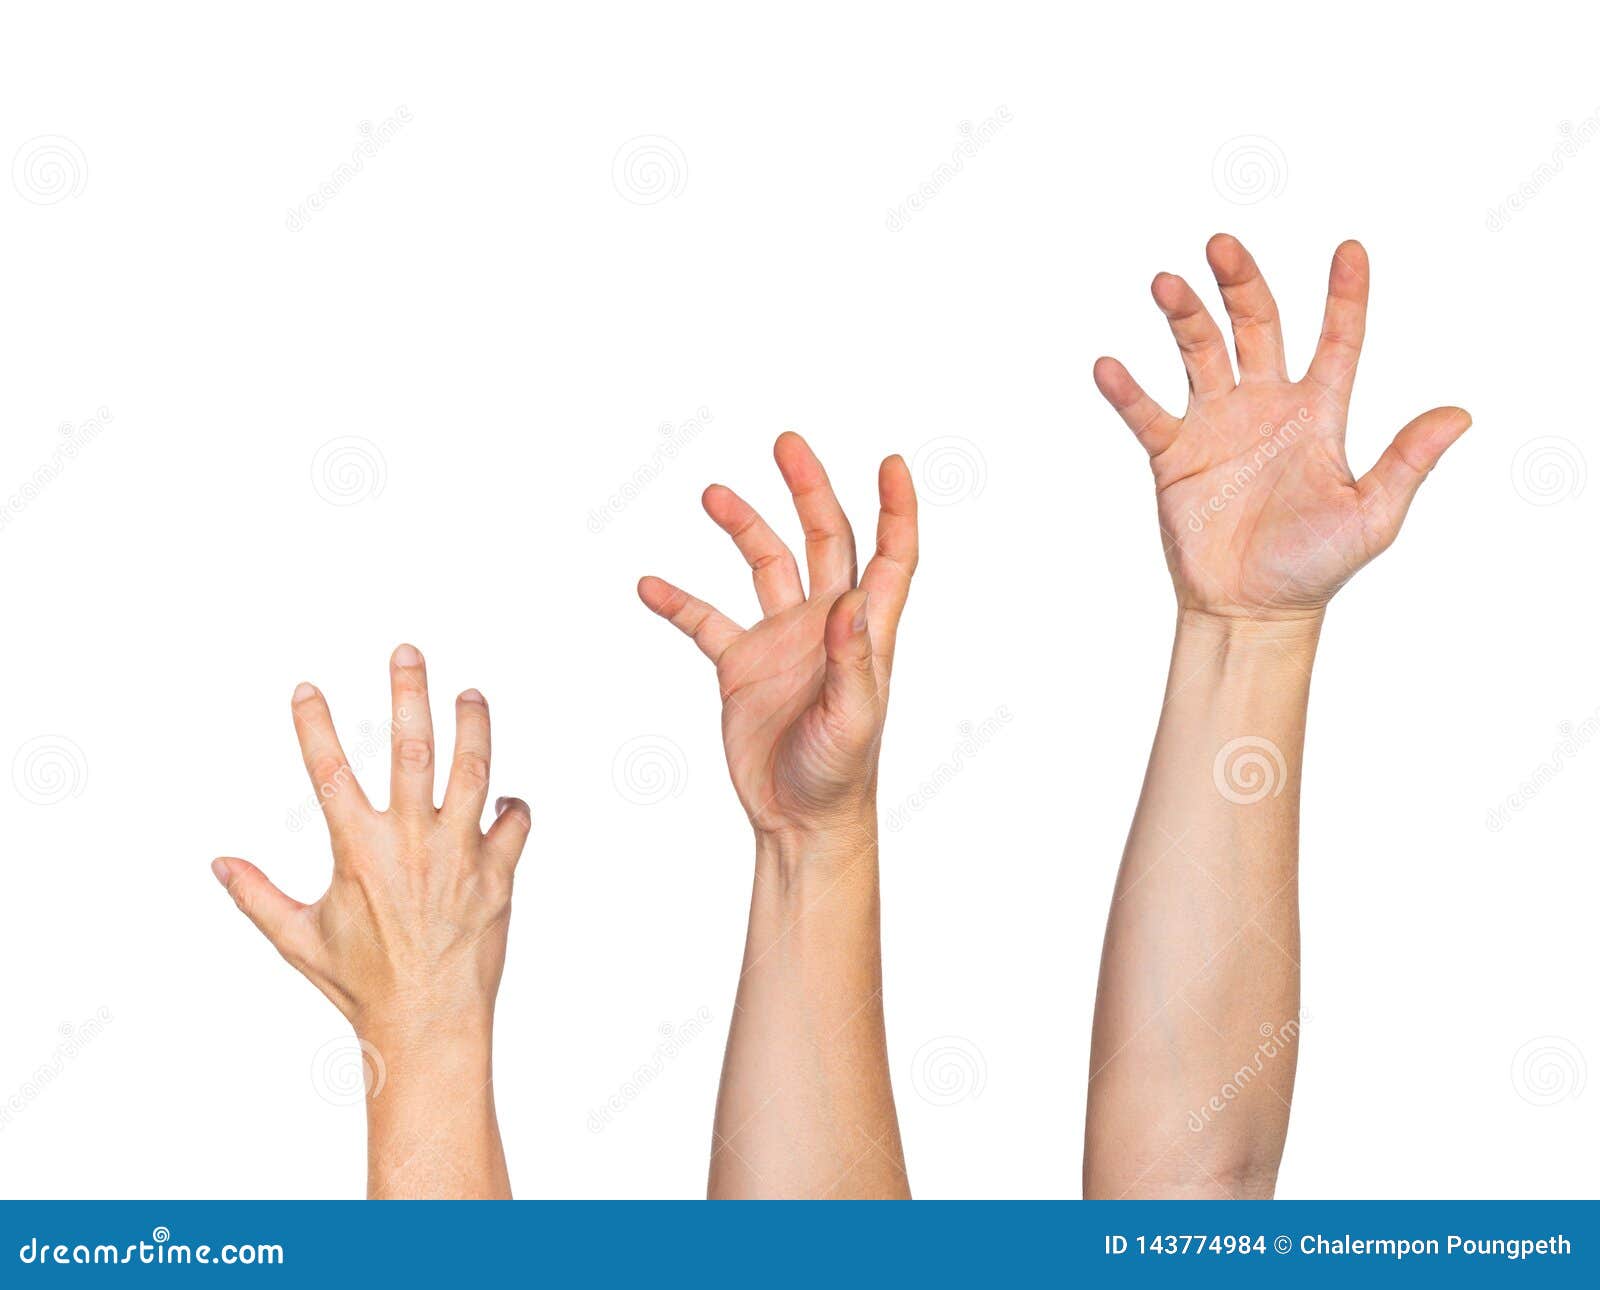 Three Male Hands Fully Stretched Reaching Out To Grab Something, White